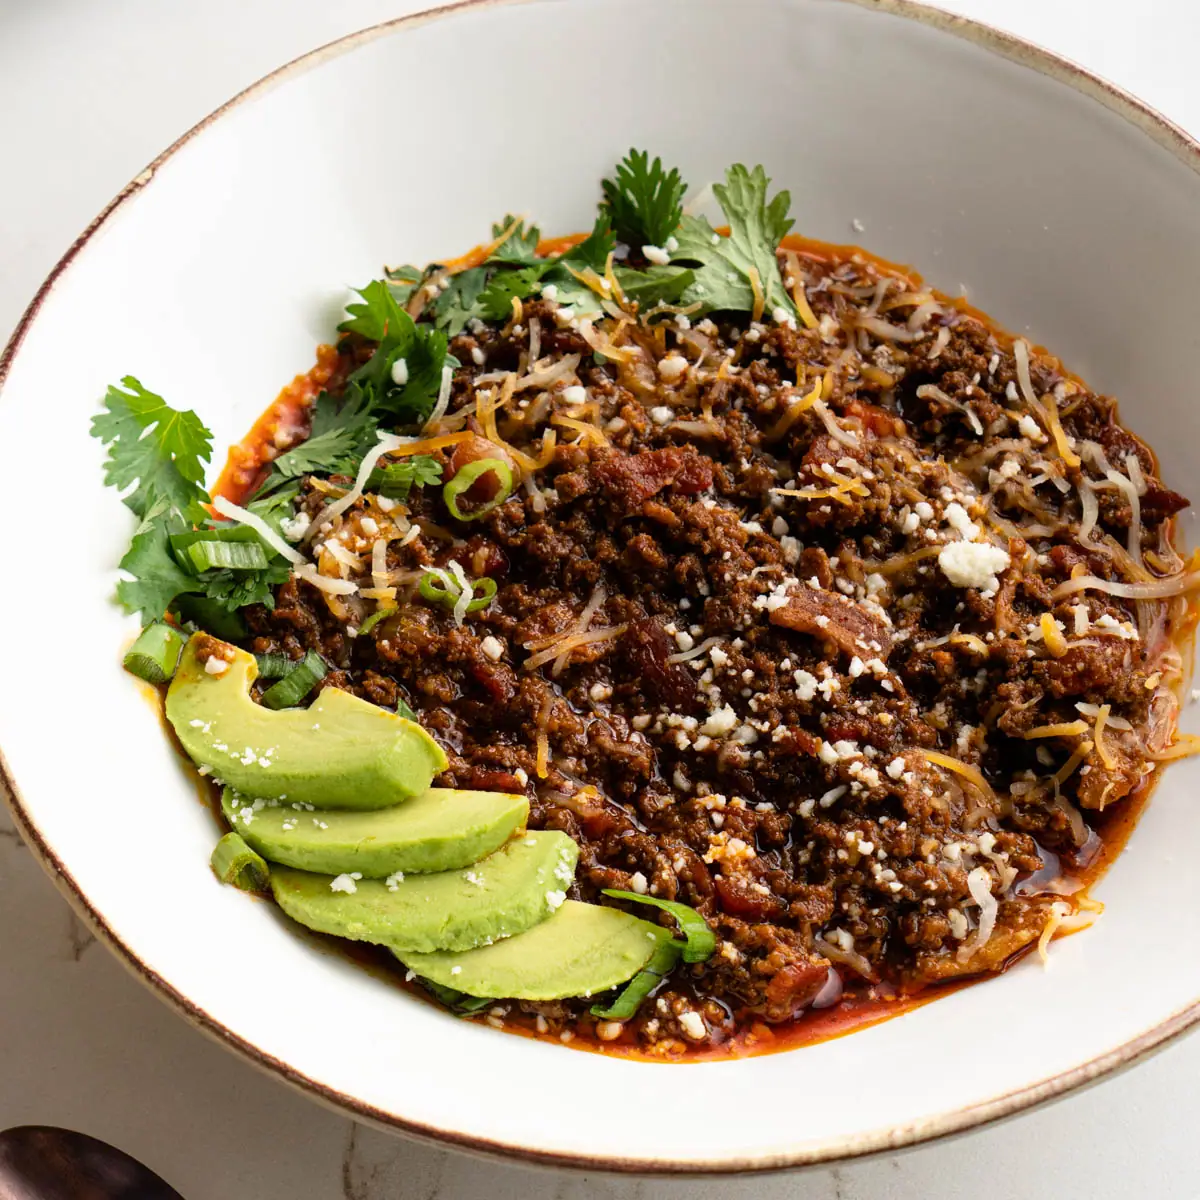 Bowl of chili garnished with avocado, cheese, and cilantro